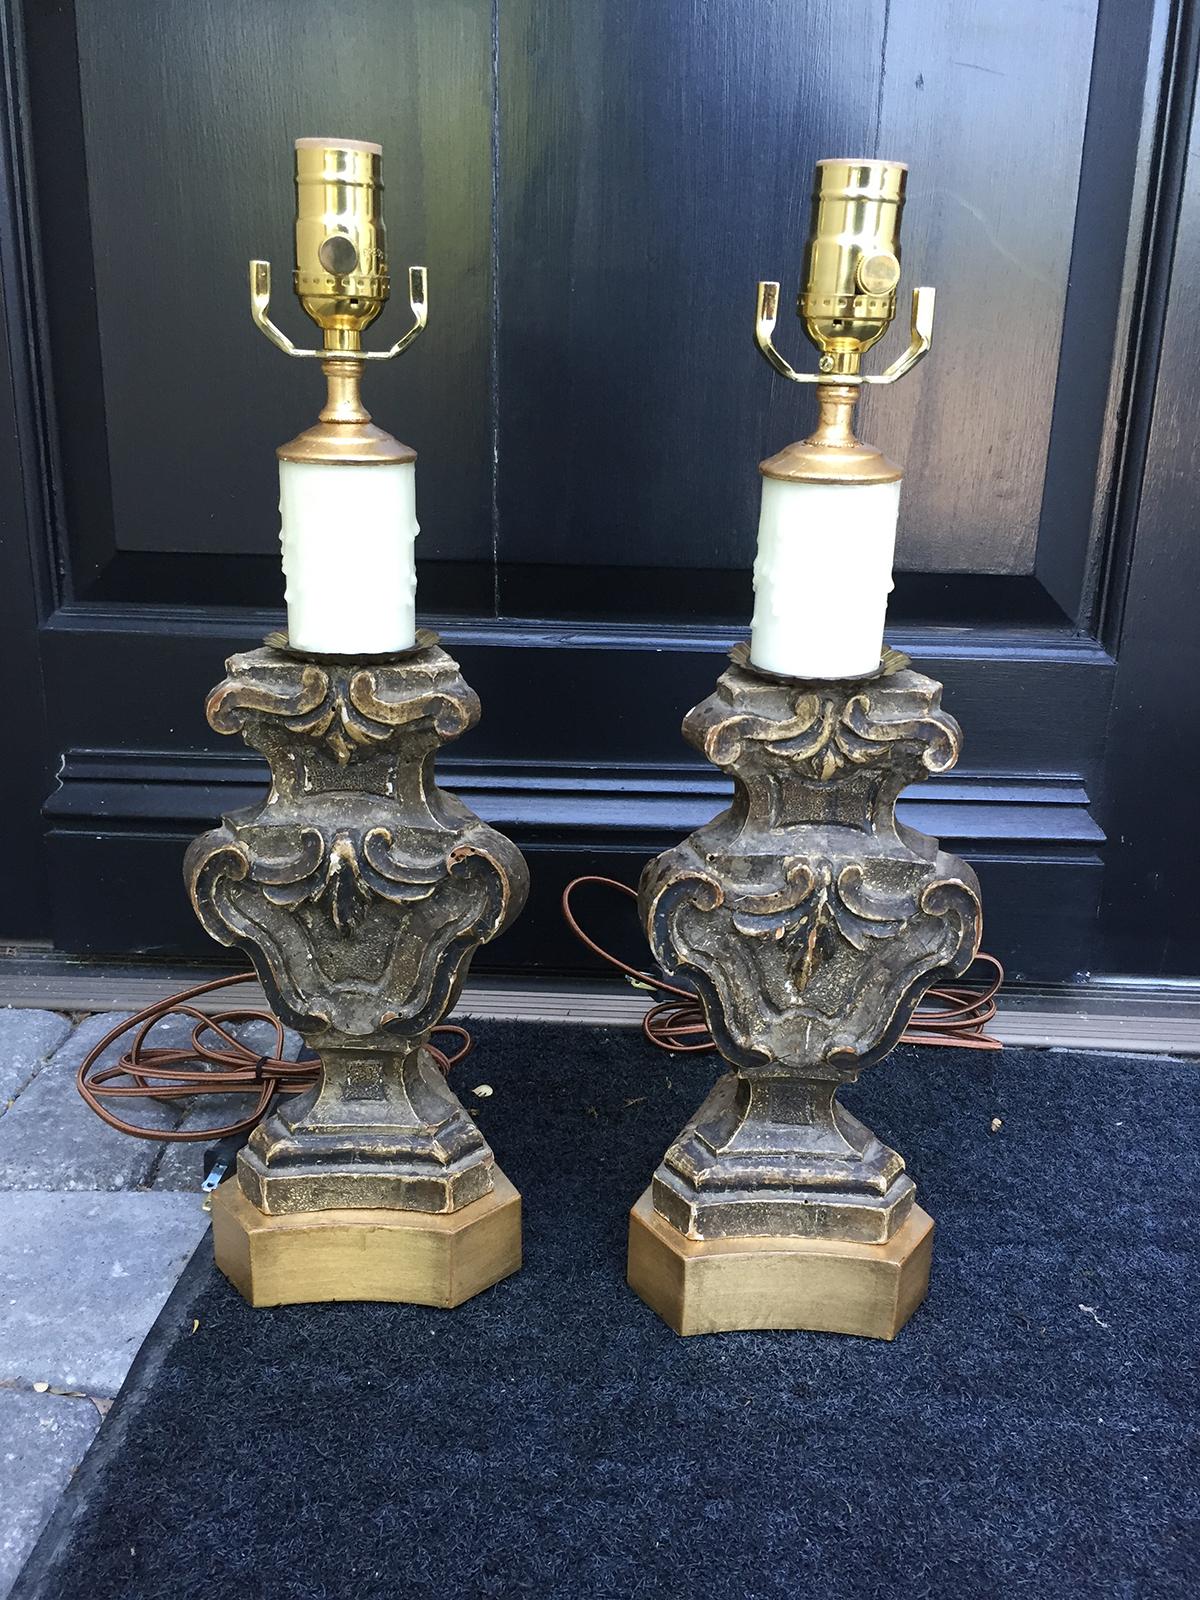 Pair of 18th-19th century Italian prickets as lamps on custom giltwood bases
New wiring.